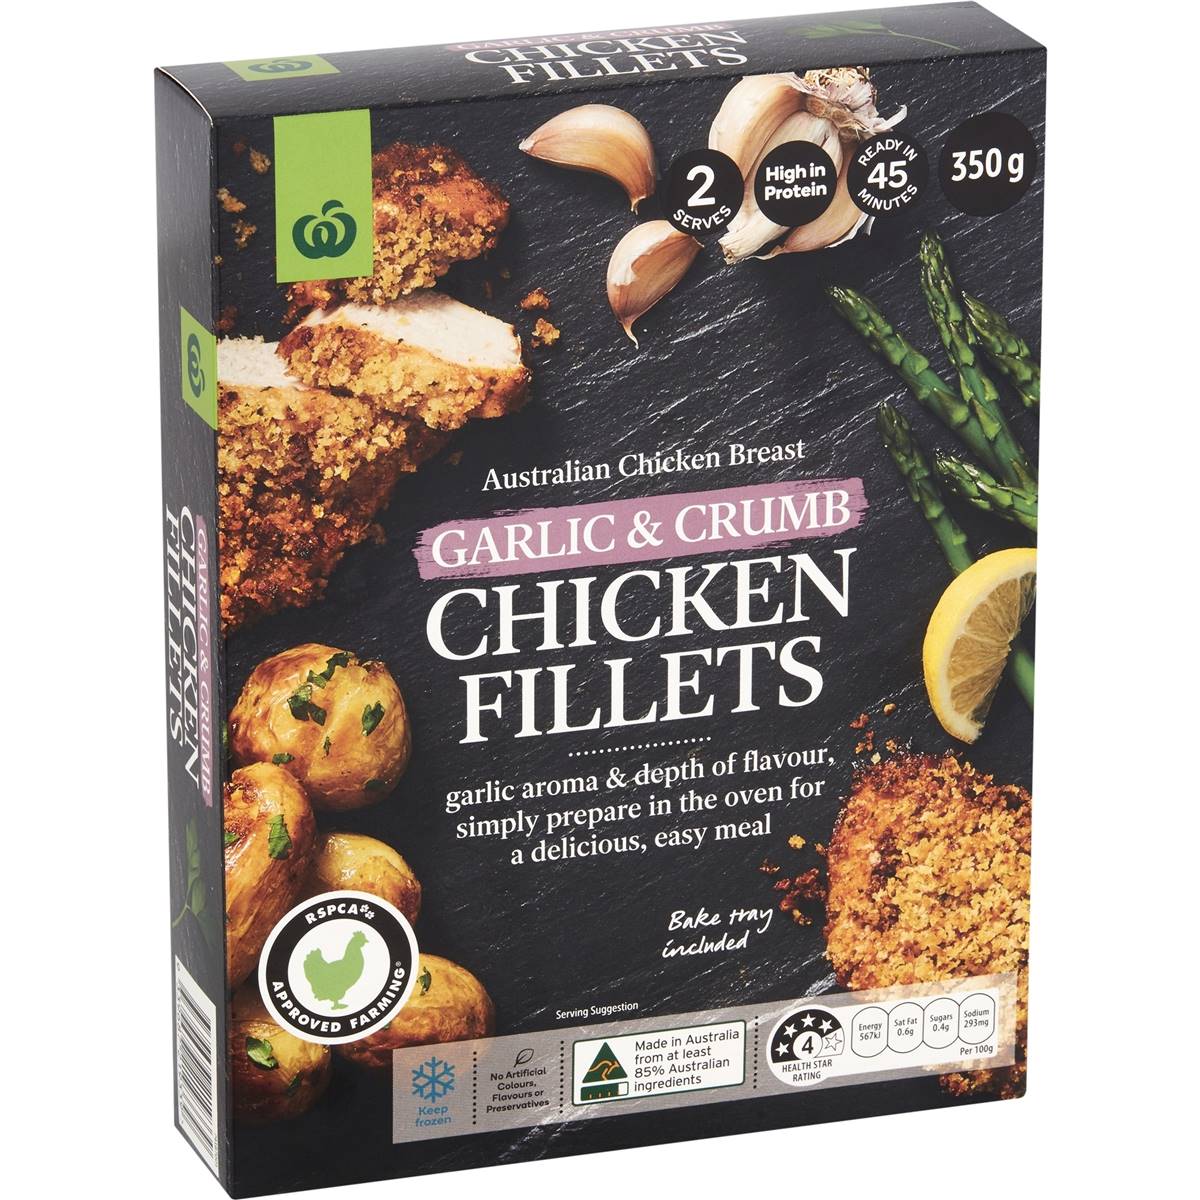 Calories in Woolworths Chicken Breast Fillets Garlic & Crumb